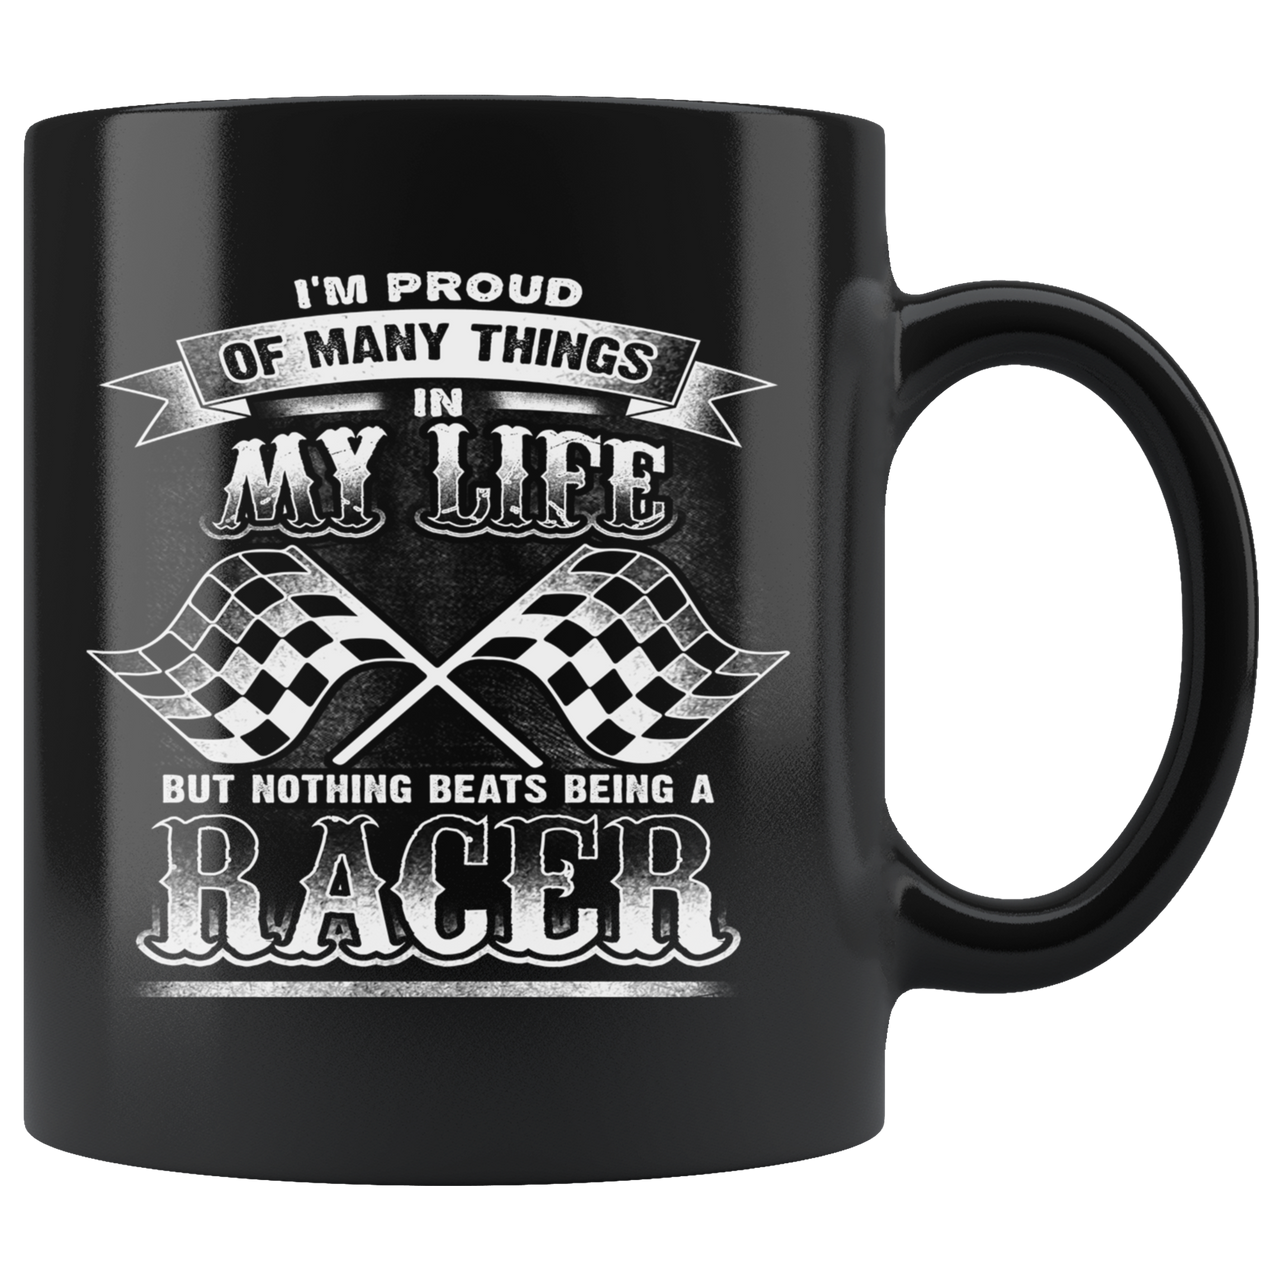 I'm Proud Of Many Things In My Life But Nothing Beats Being A Racer Mug!